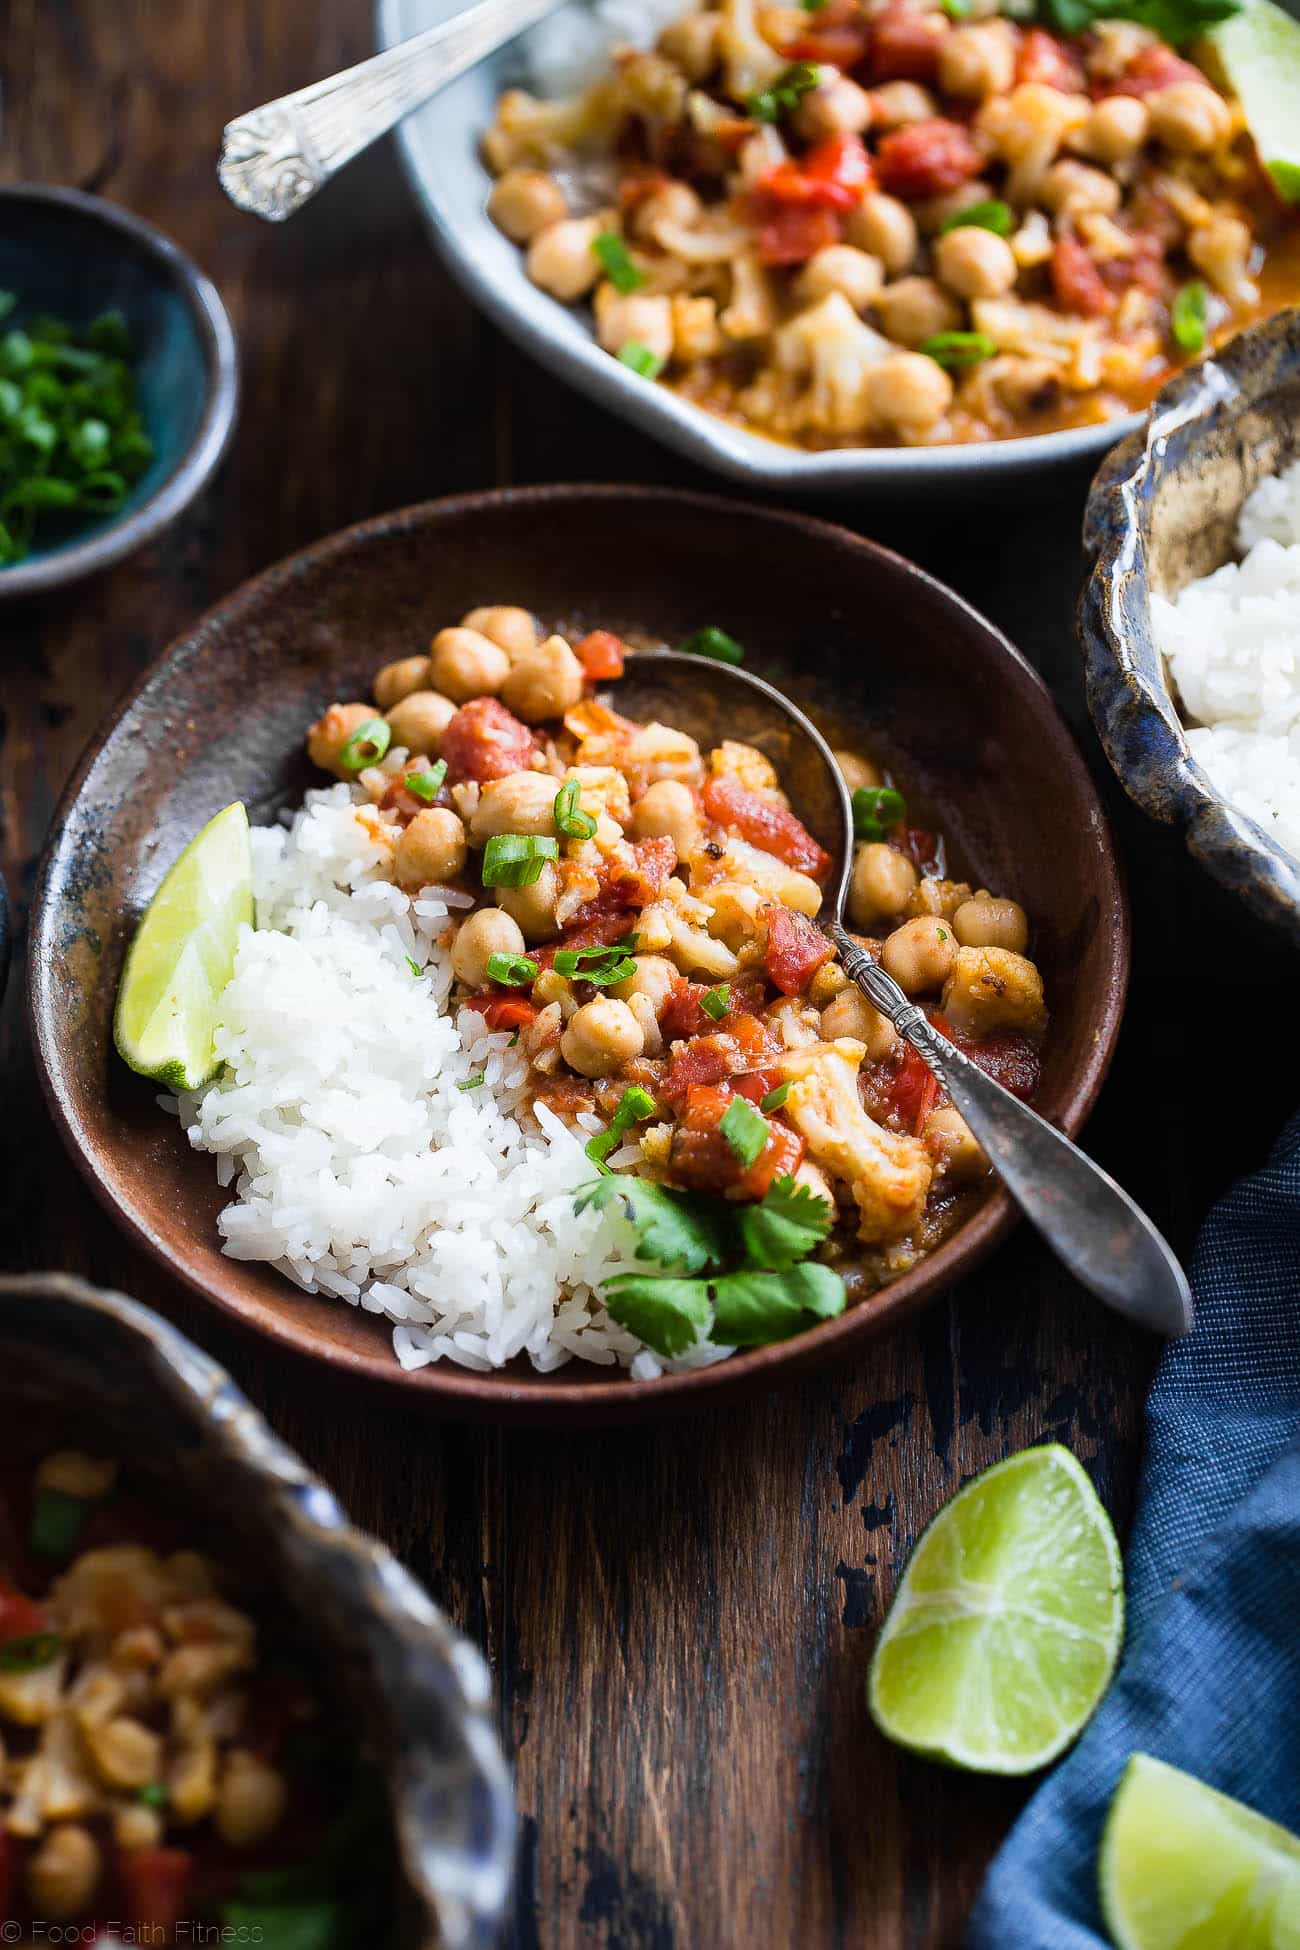 Instant Pot Vegan Chickpea Curry - This easy chickpea curry recipe is made in the Instant Pot and ready in 20 mins! It uses coconut milk and tomatoes to make it thick and so creamy! Makes great leftovers and is great for meal prep! | Foodfaithfitness.com | @FoodFaithFit